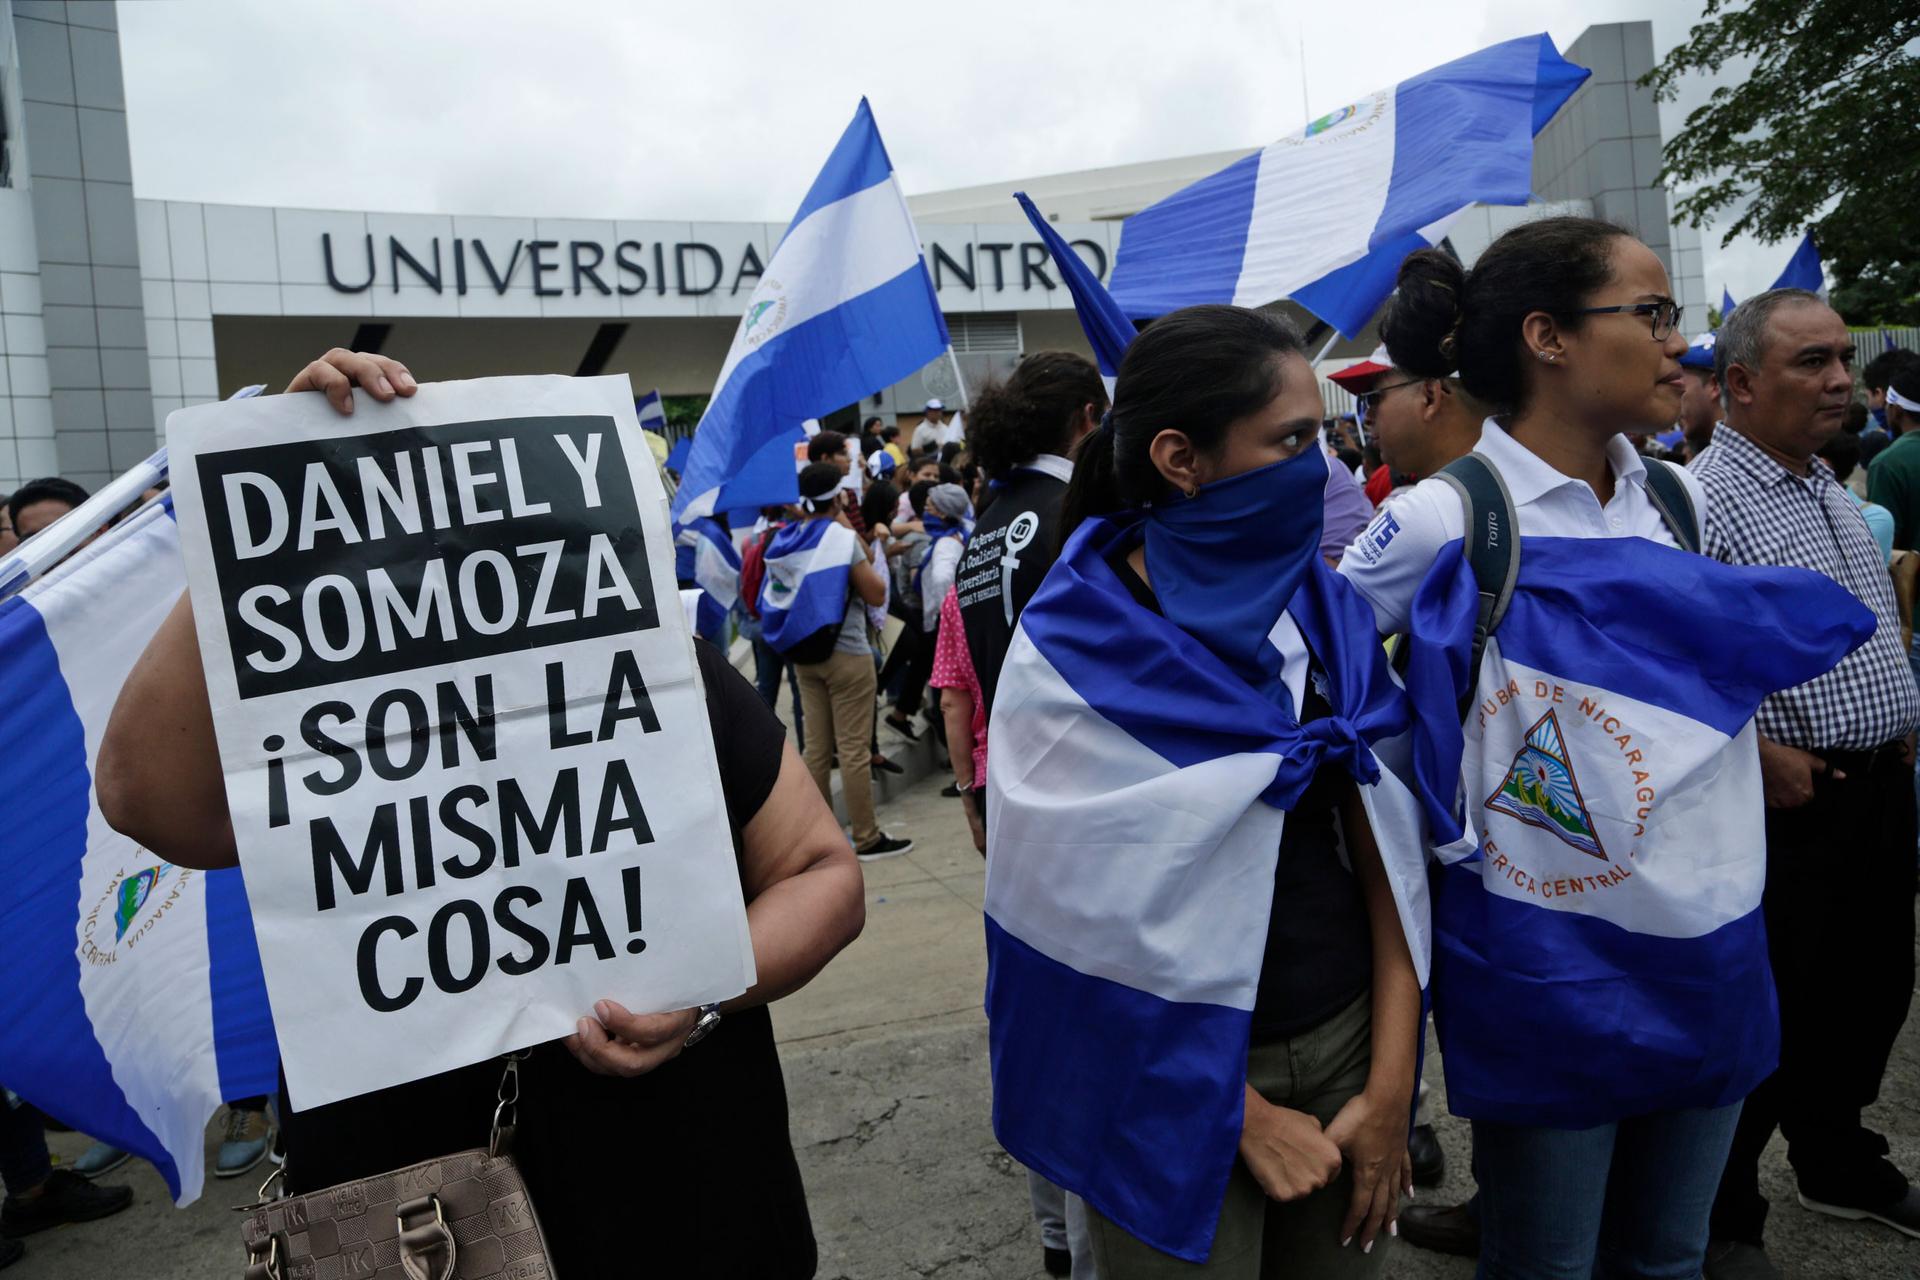 Demonstrators protest outside the Jesuit-run Universidad Centroamericana, UCA, demanding the university's allocation of its share of 6% of the national budget in Managua, Nicaragua, Aug. 2, 2018.